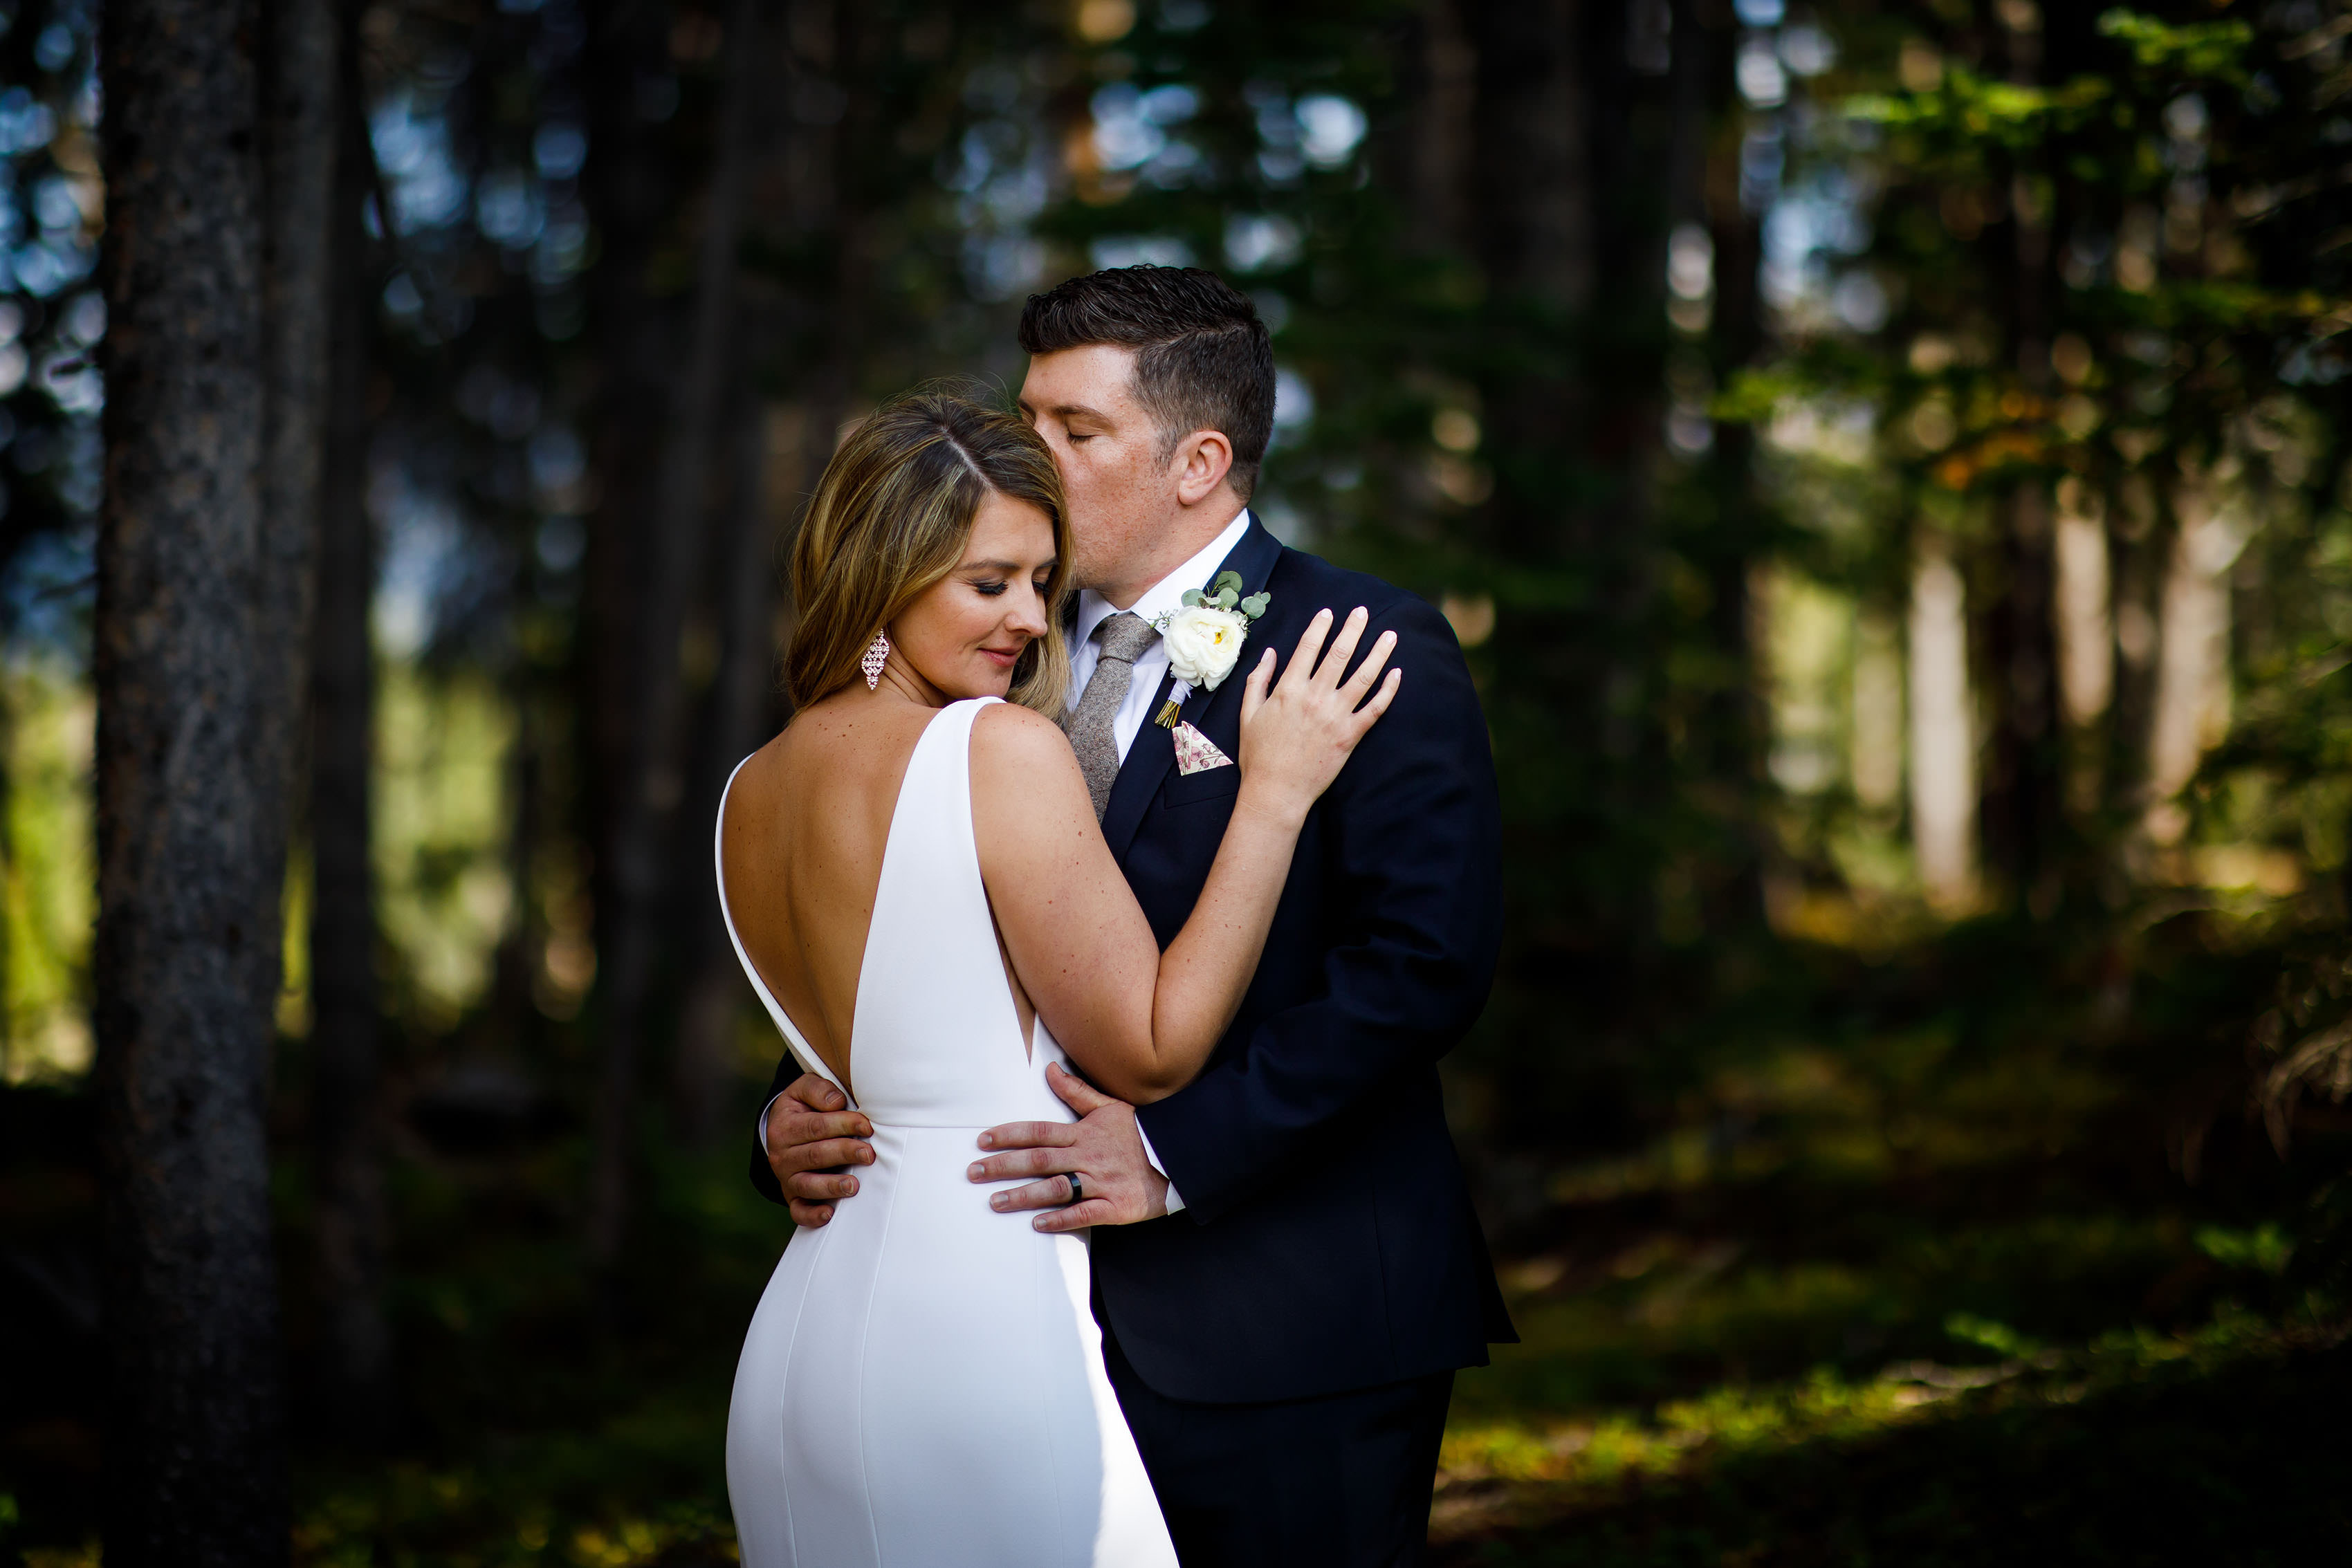 The bride poses while the groom gives her a kiss in a backless sexy gown  during their wedding at TenMile Station - Justin Edmonds Photography